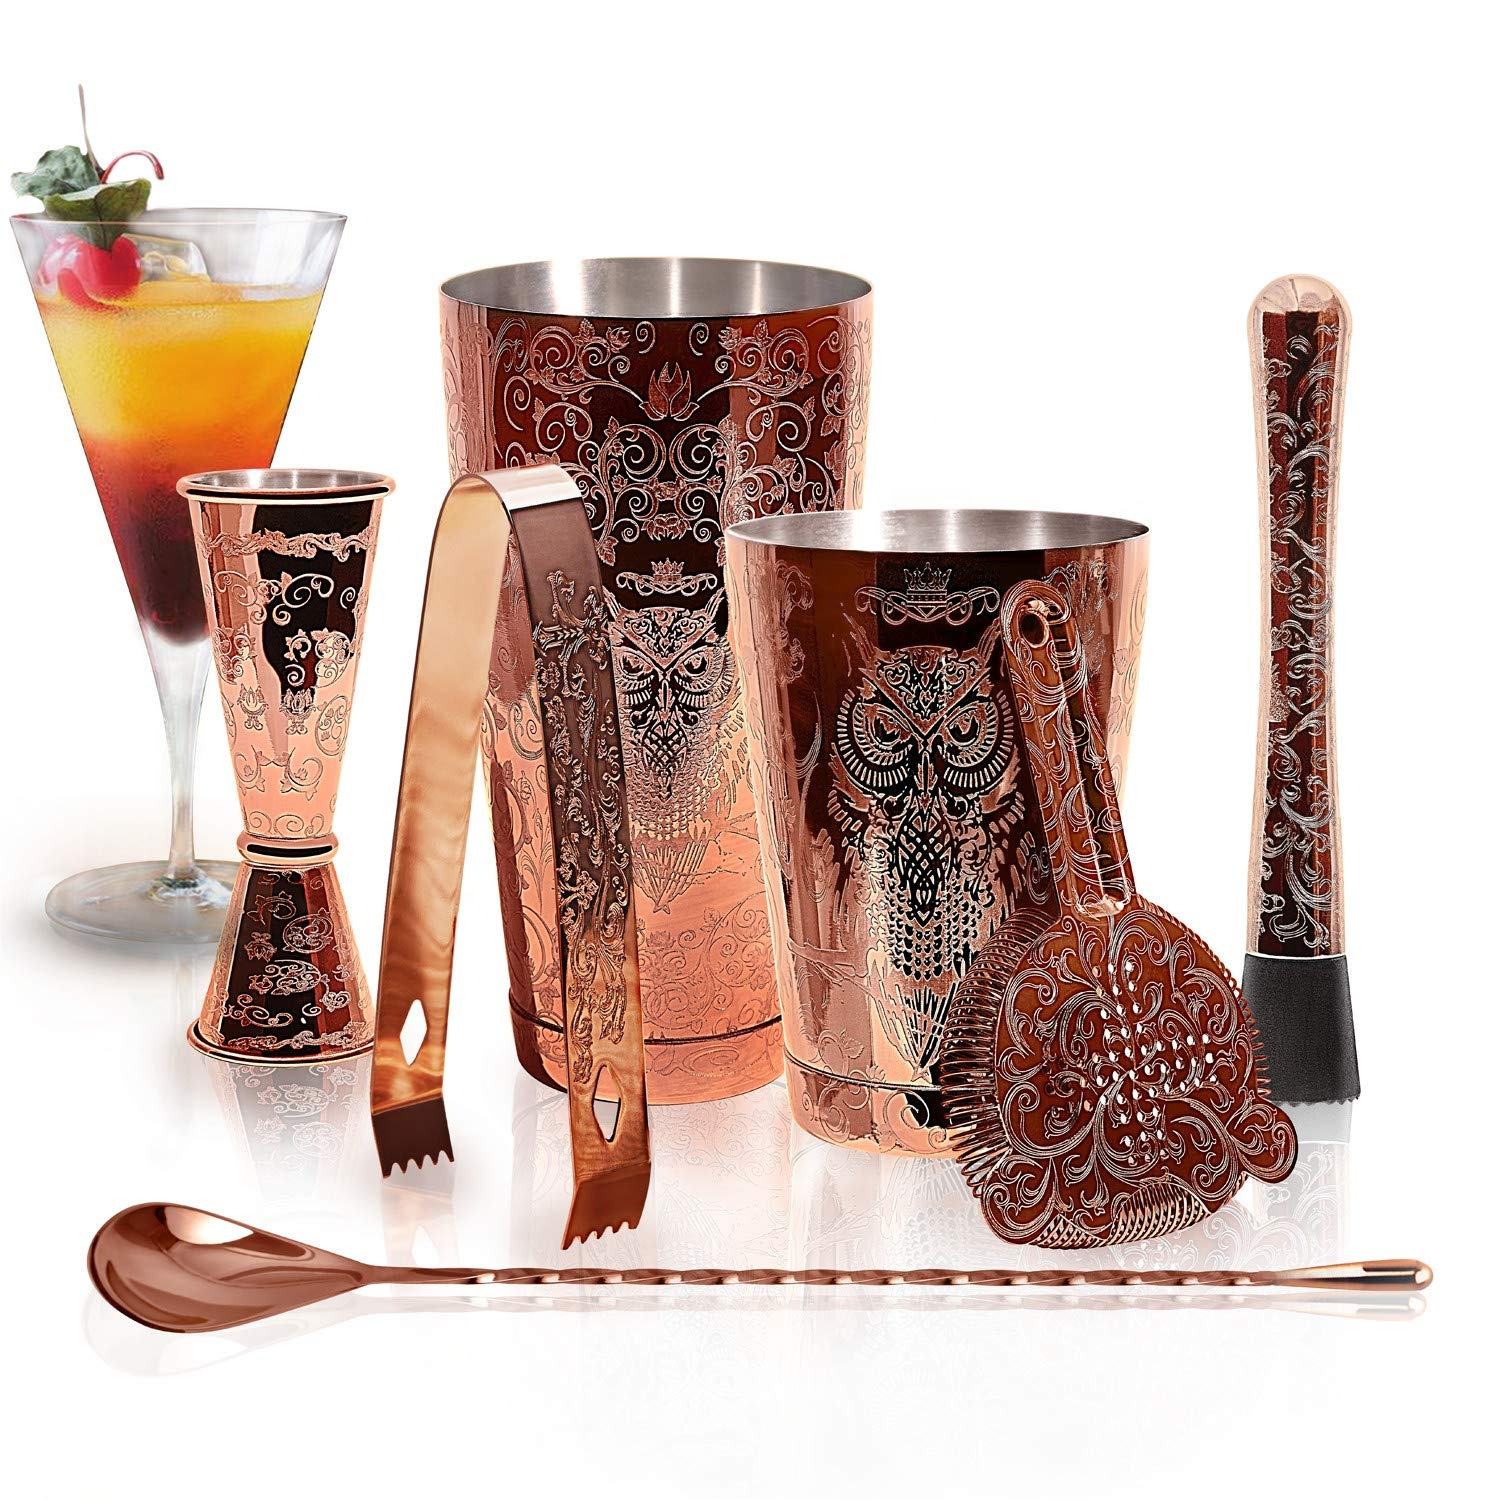 Etch Design Plated Copper Food Grade Stainless Steel Cocktail Shaker Set - COPY - 2qanib